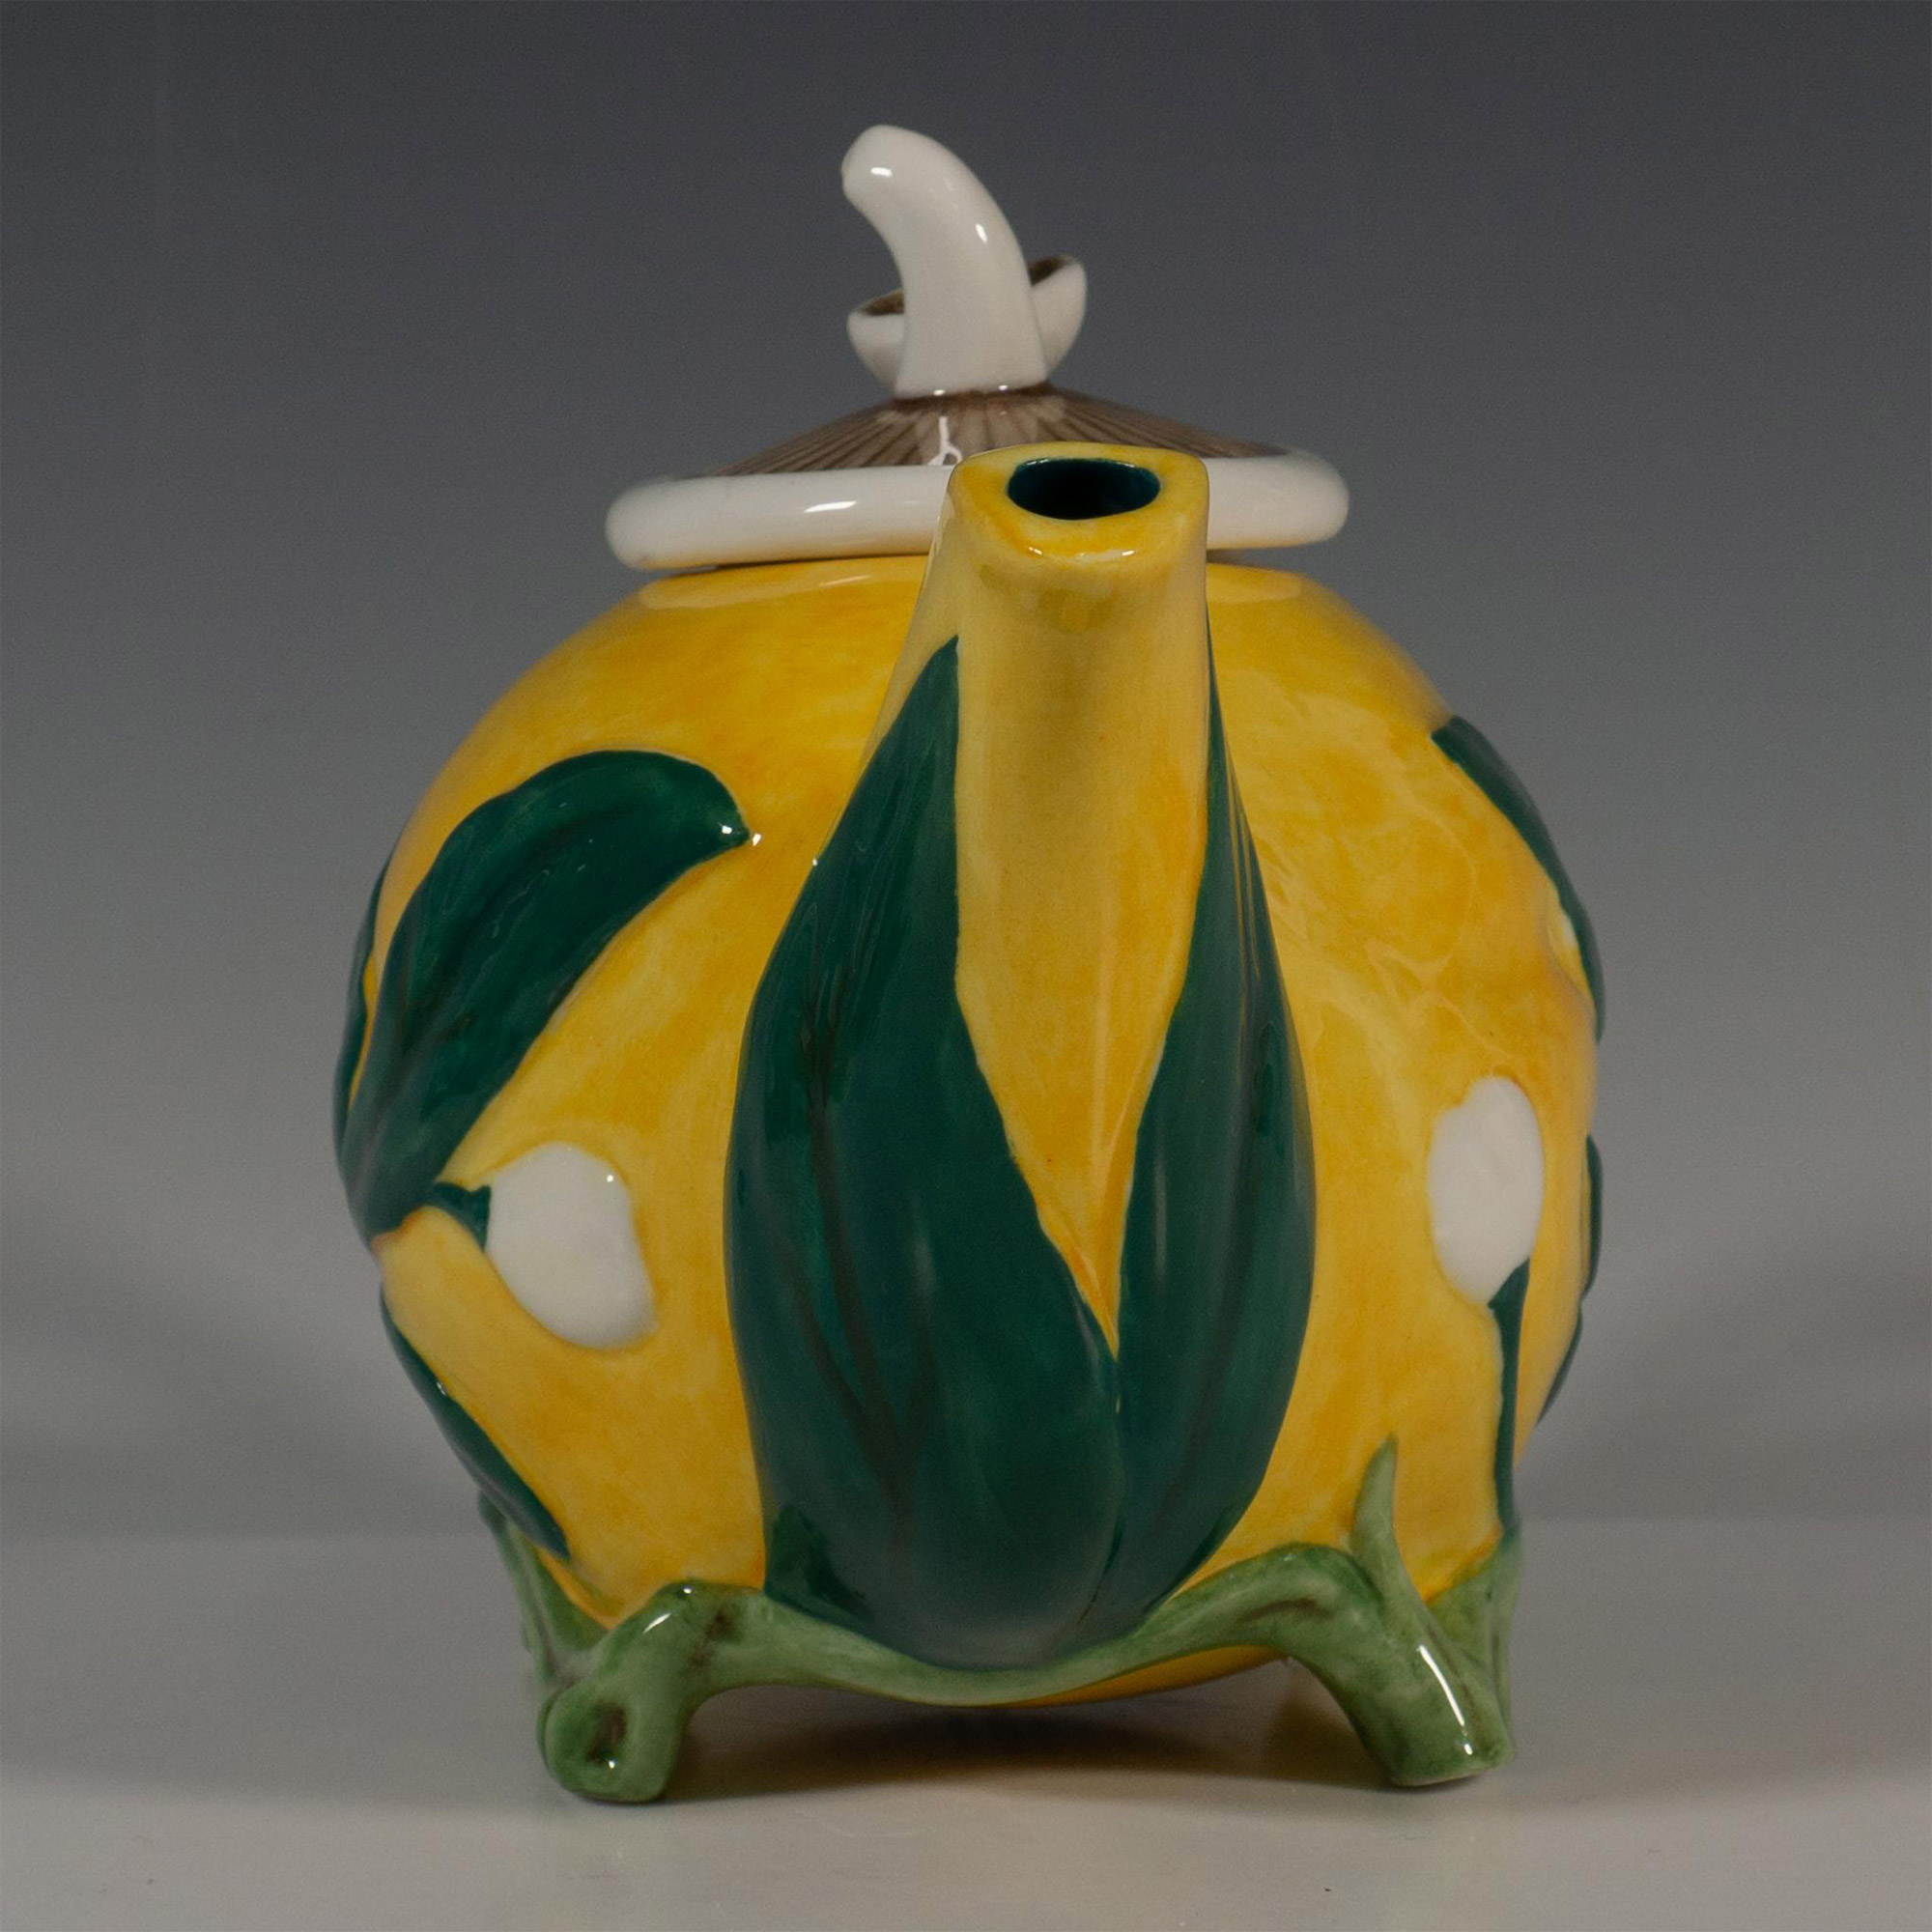 Minton Archive Collection Limited Edition Mushroom Teapot - Image 2 of 5